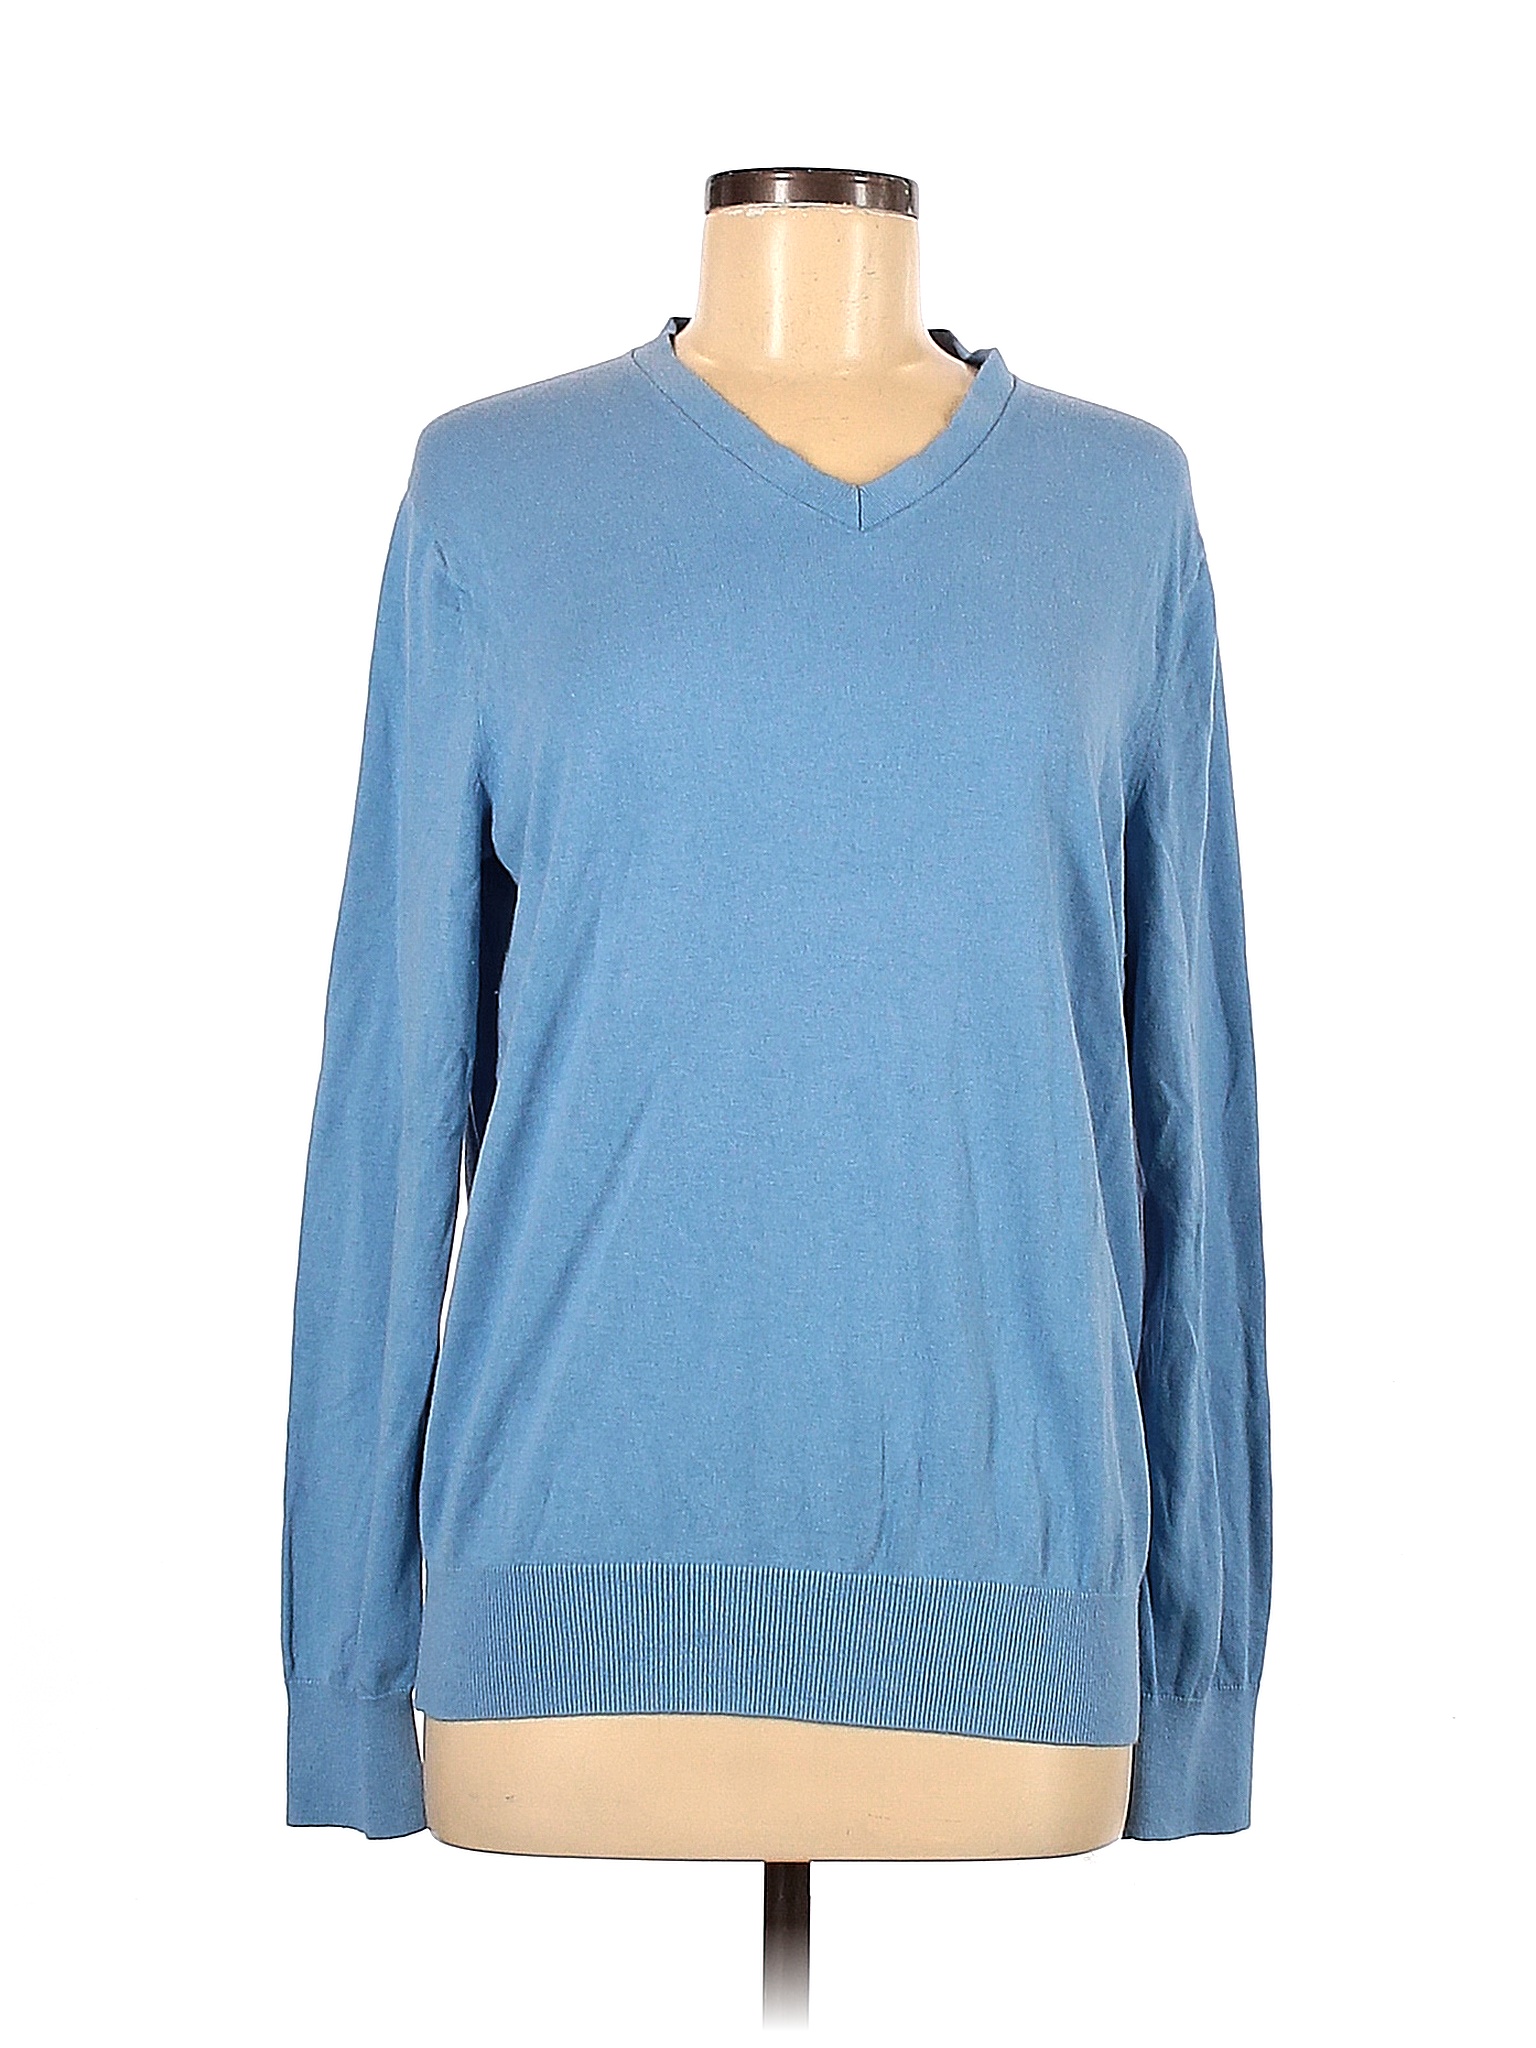 Banana Republic Solid Blue Pullover Sweater Size M - 59% off | thredUP